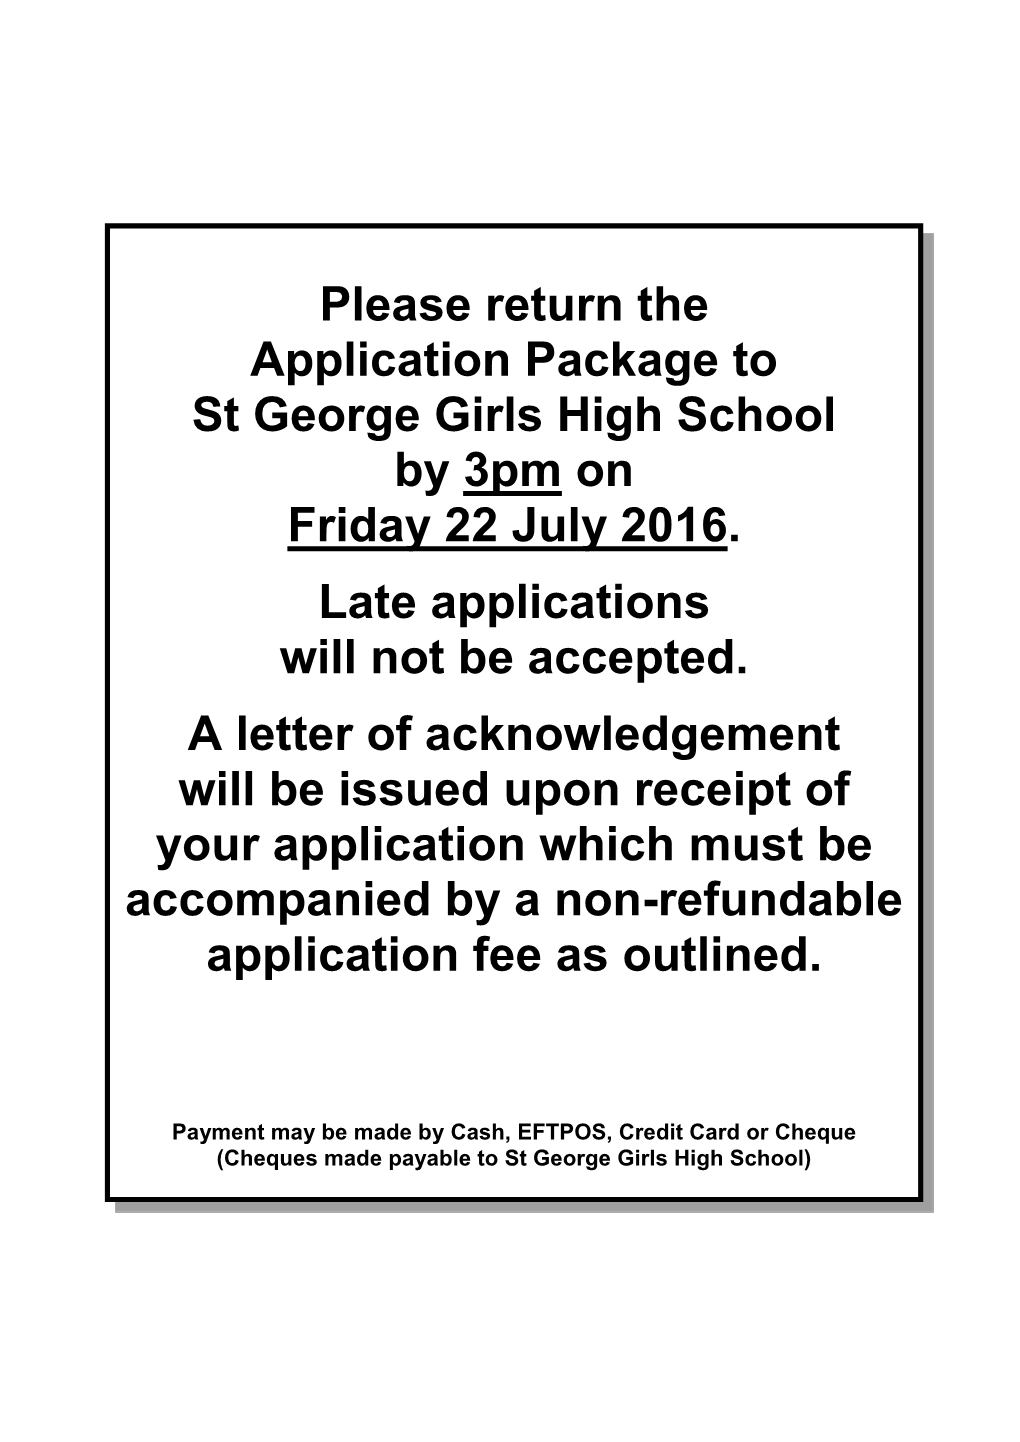 Please Return the Application Package to St George Girls High School by 3Pm on Friday 22 July 2016